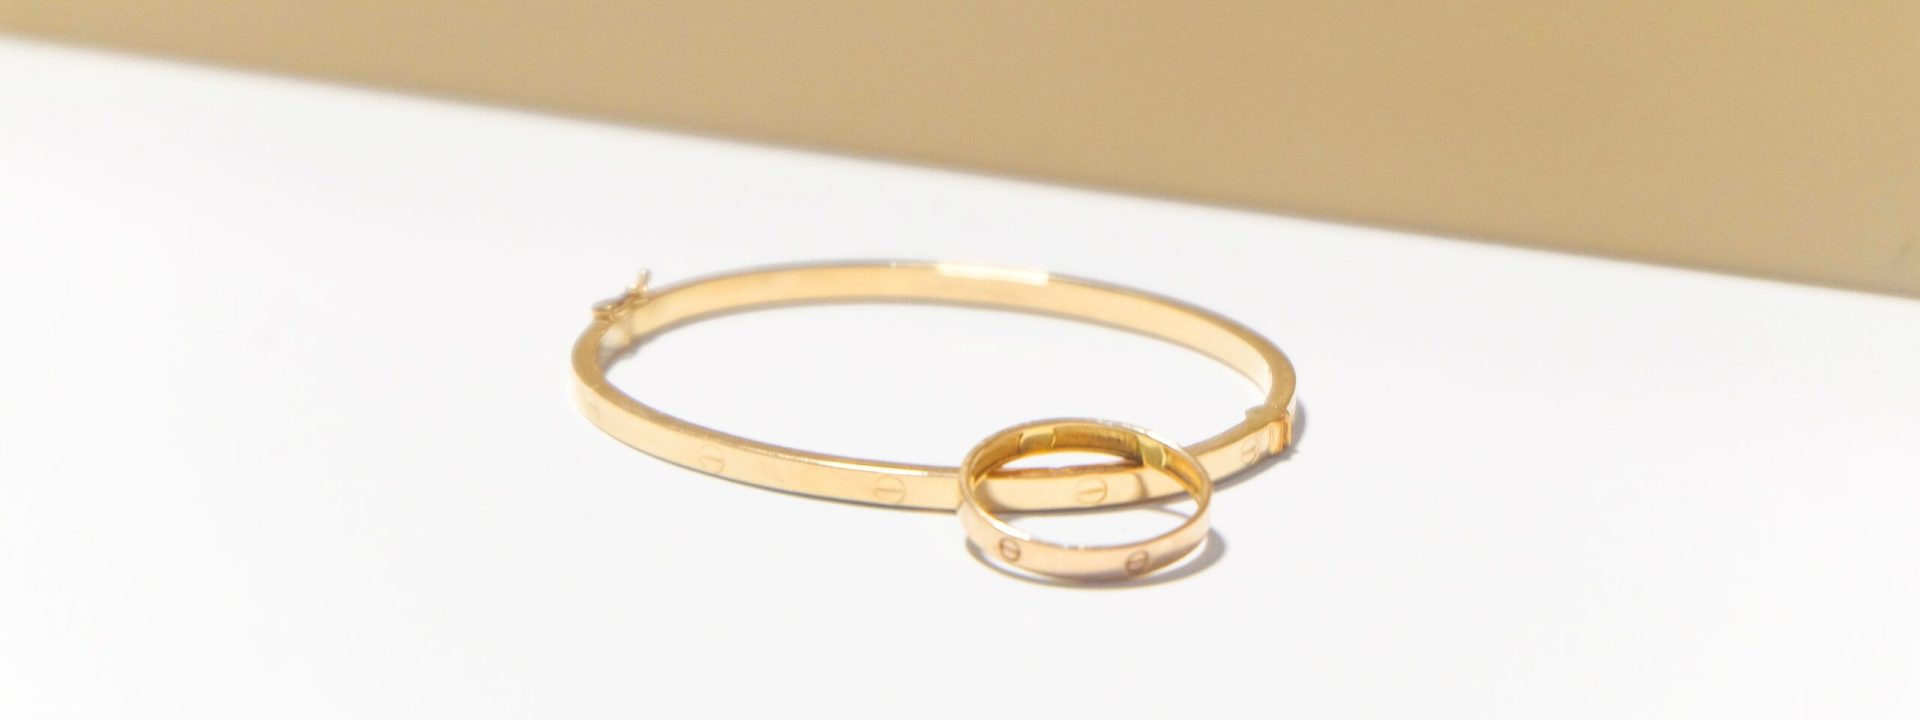 Vintage Cartier LOVE ring in yellow gold stacked on a vintage Cartier LOVE bracelet in yellow gold.